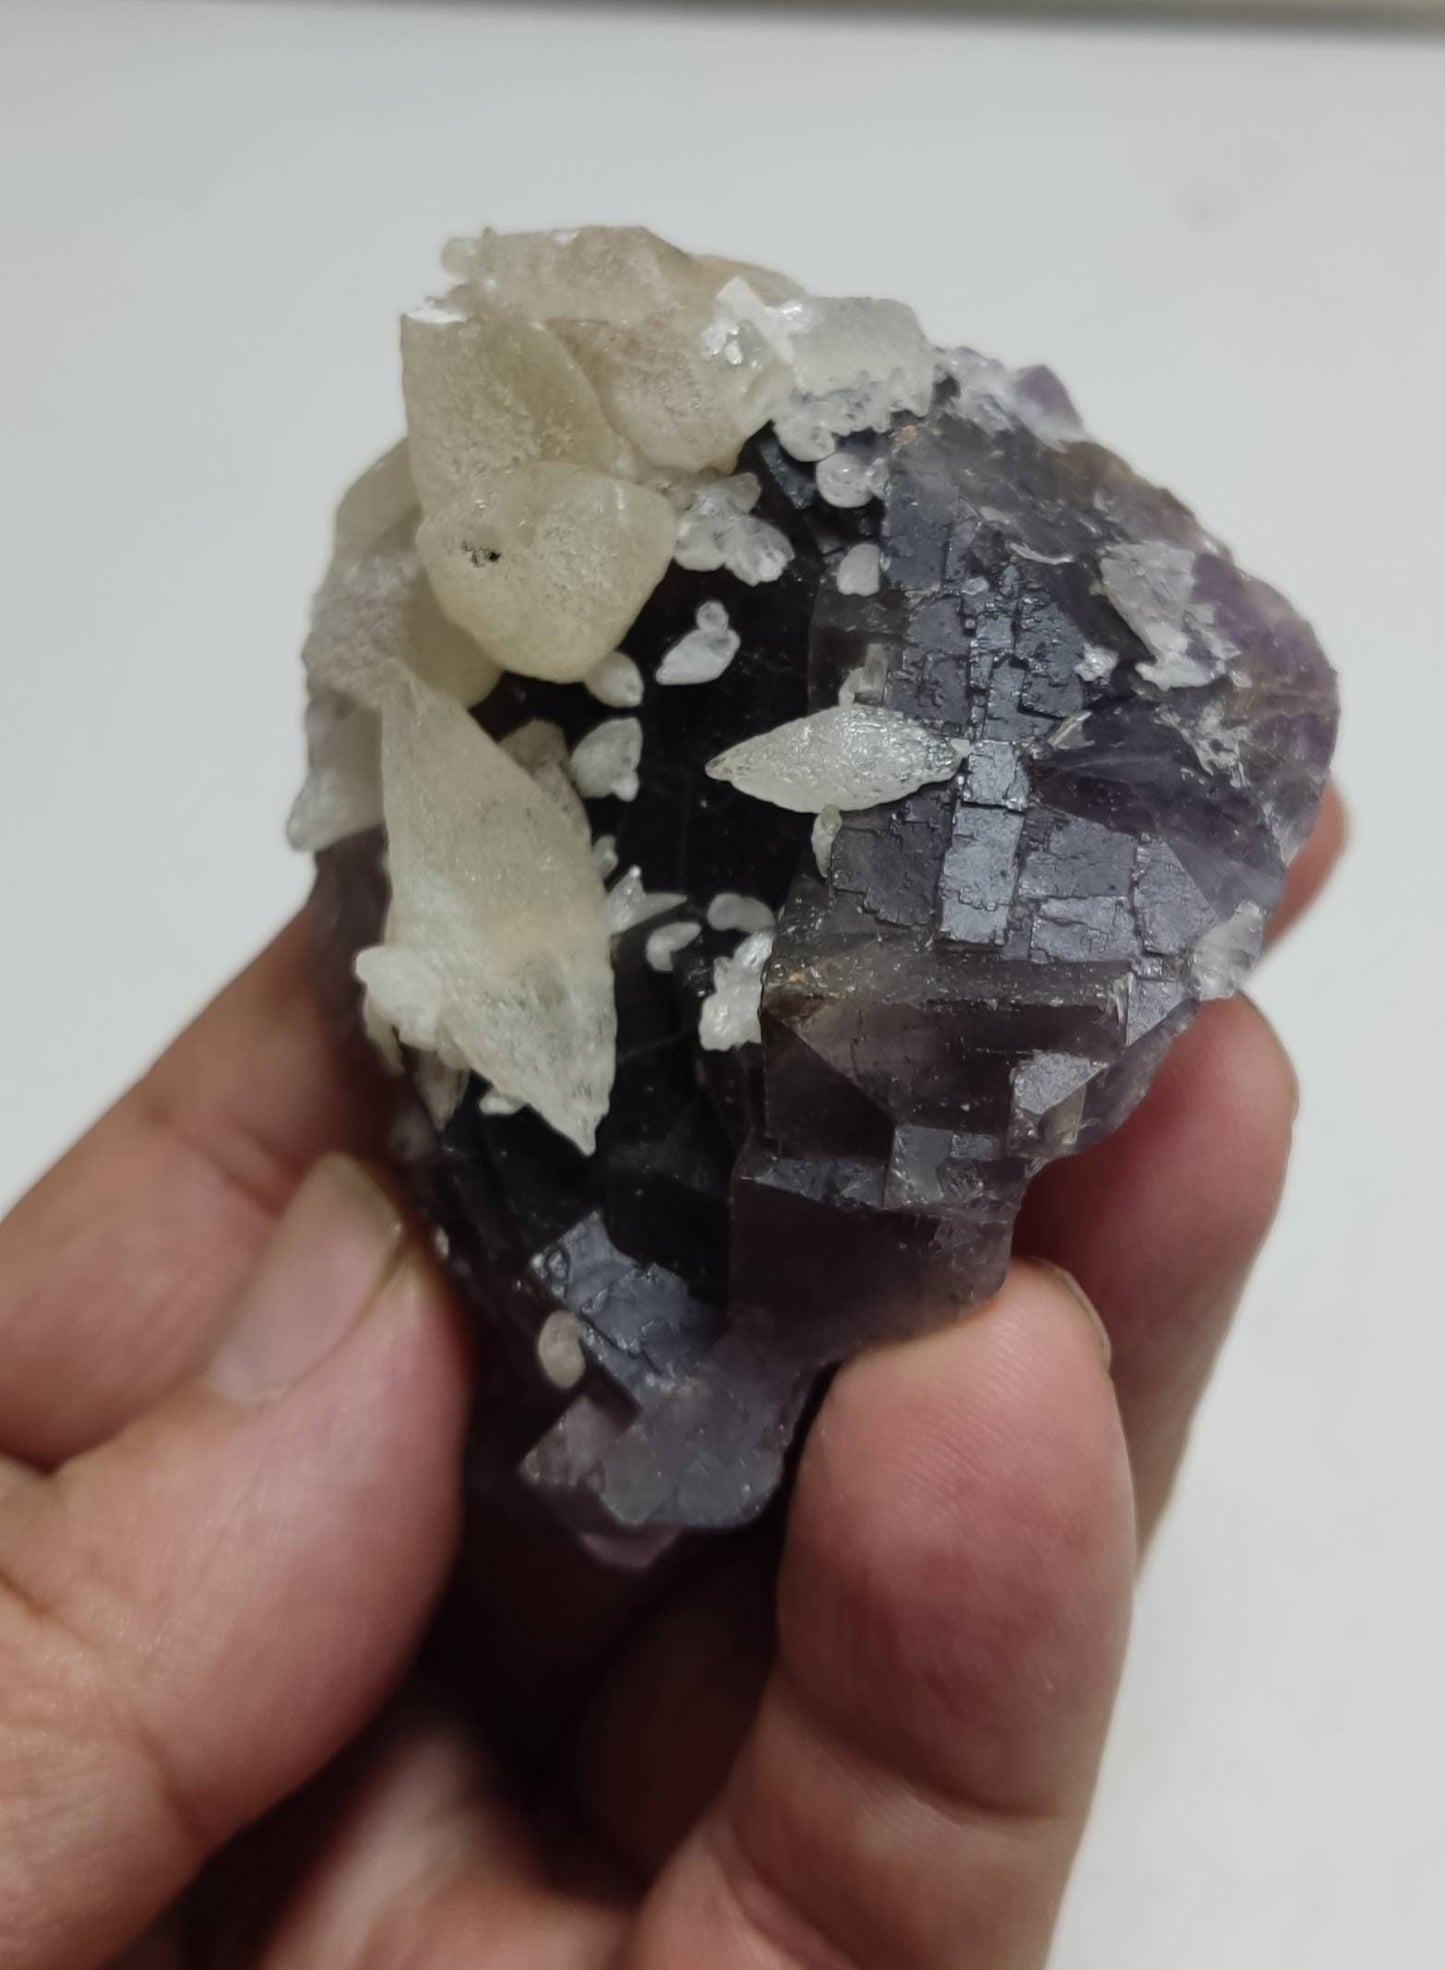 An amazing Single beautiful specimen of grey fluorite with calcite crystals 165 grams